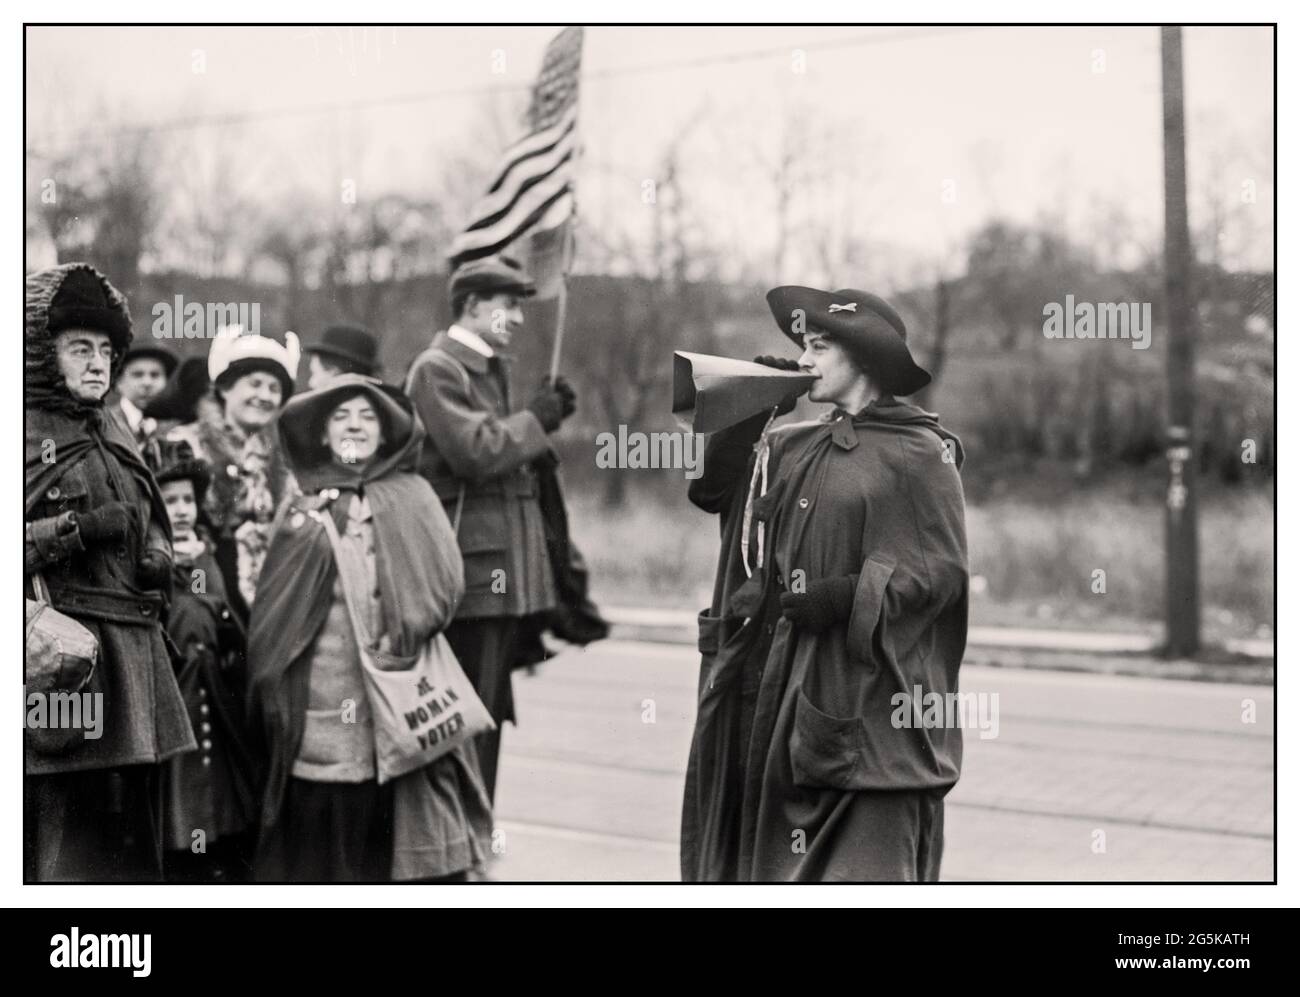 SUFFRAGETTES USA Gen. Jones'  'FORWARD'--suffragettes USA  Rosalie Gardiner Jones (February 24, 1883 – January 12, 1978) was an American suffragette.  She took the 'Pankhursts' as role models and after hearing of the 'Brown Women' she organised marches to draw attention to the suffrage cause. She was known as 'General Jones' because of her following. Created / Published [between ca. 1910 and ca. 1915] seen here motivating her followers with a handmade megaphone. America USA Stock Photo